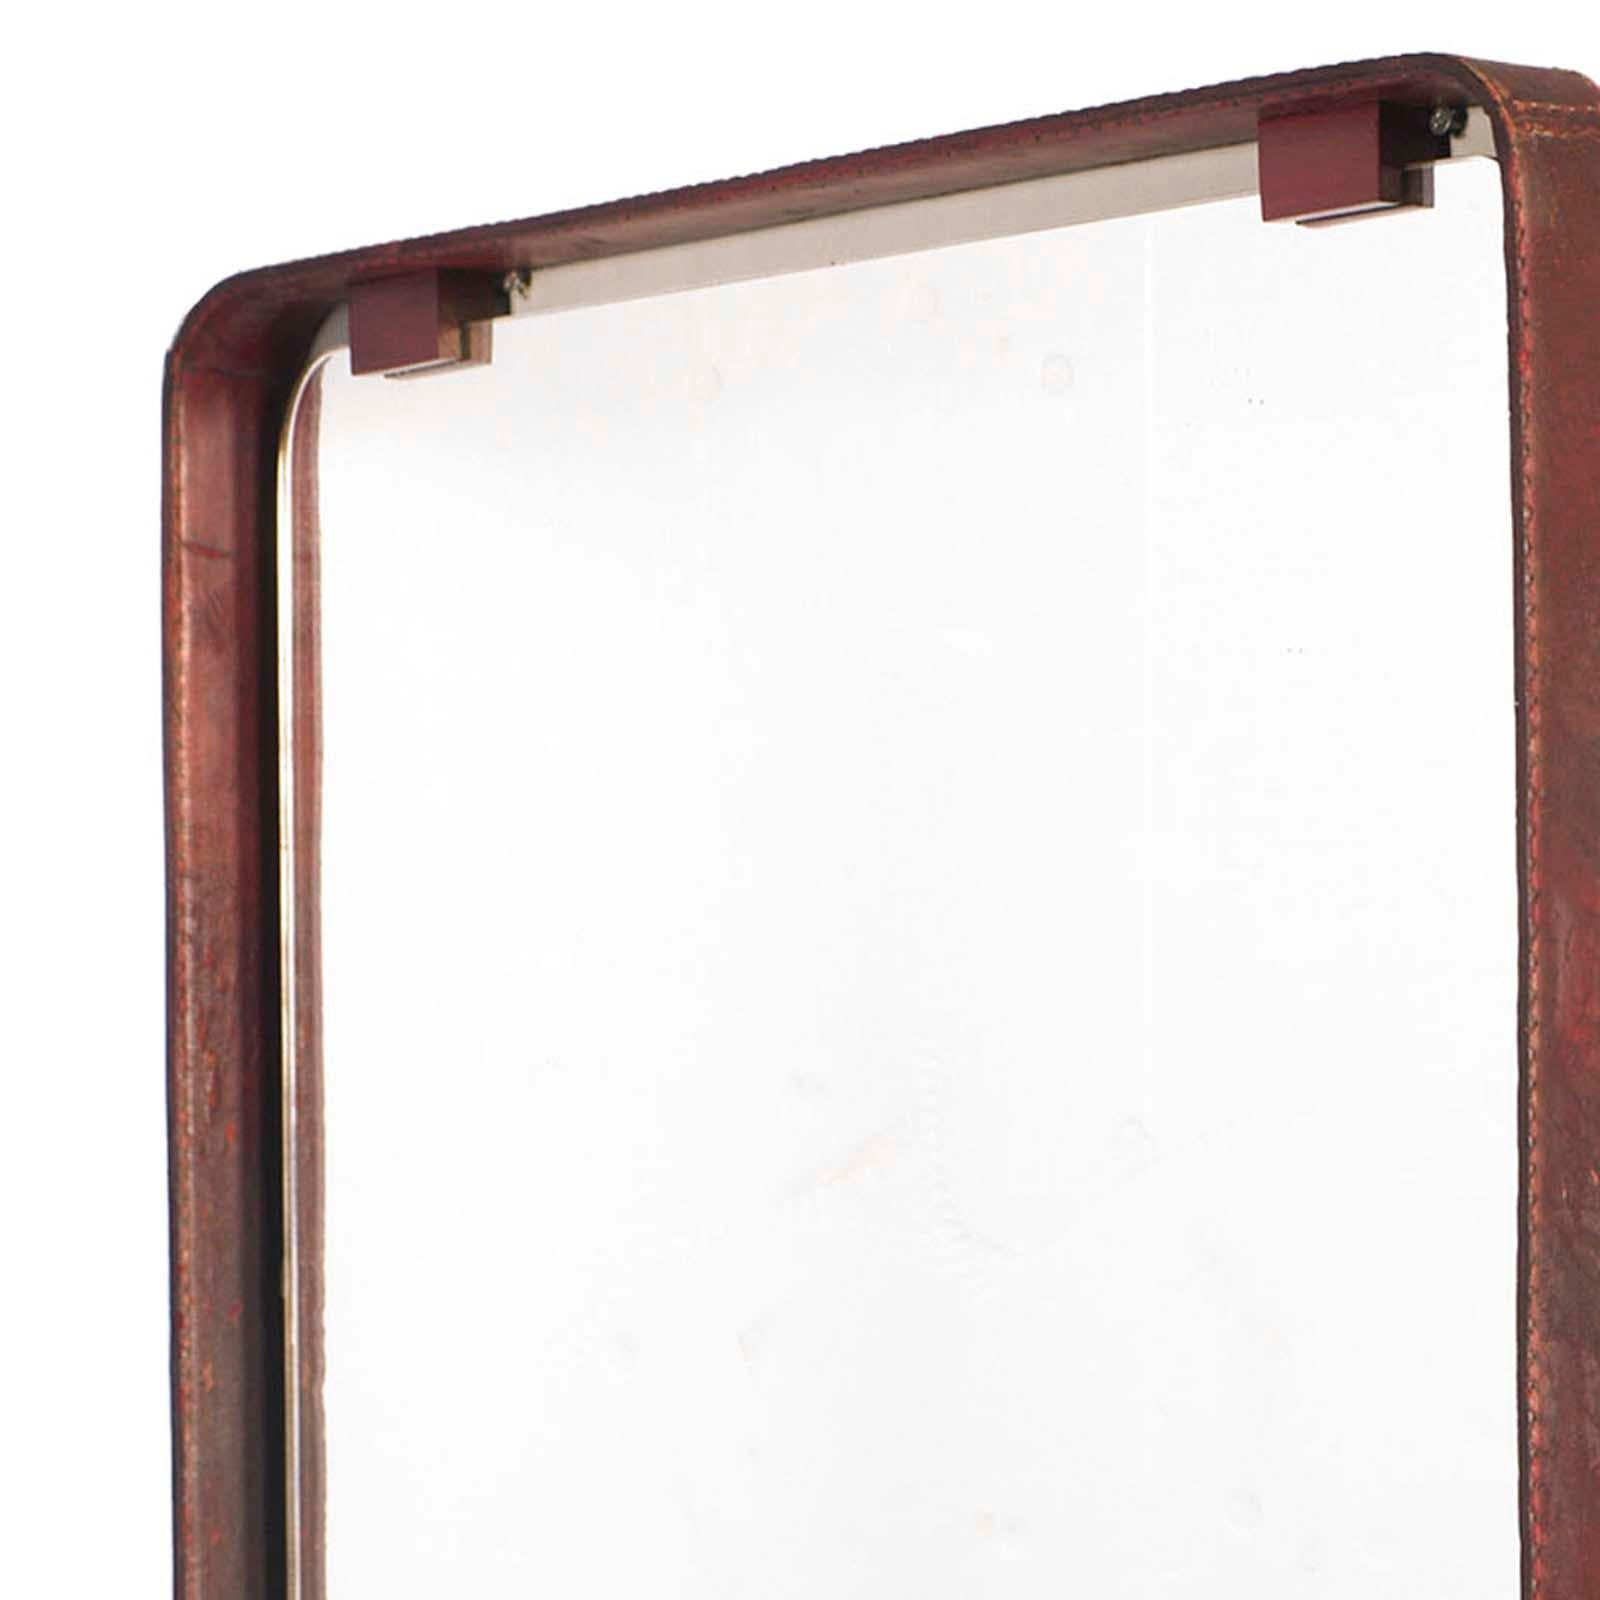 Rare and particular Mid-Century Modern mirror with steel framed covered leather. Fontanit branded mirror, by Fontana Arte


About Fontana Arte
FontanaArte is an Italian company founded in Milan in 1932 by Luigi Fontana and Giò Ponti and